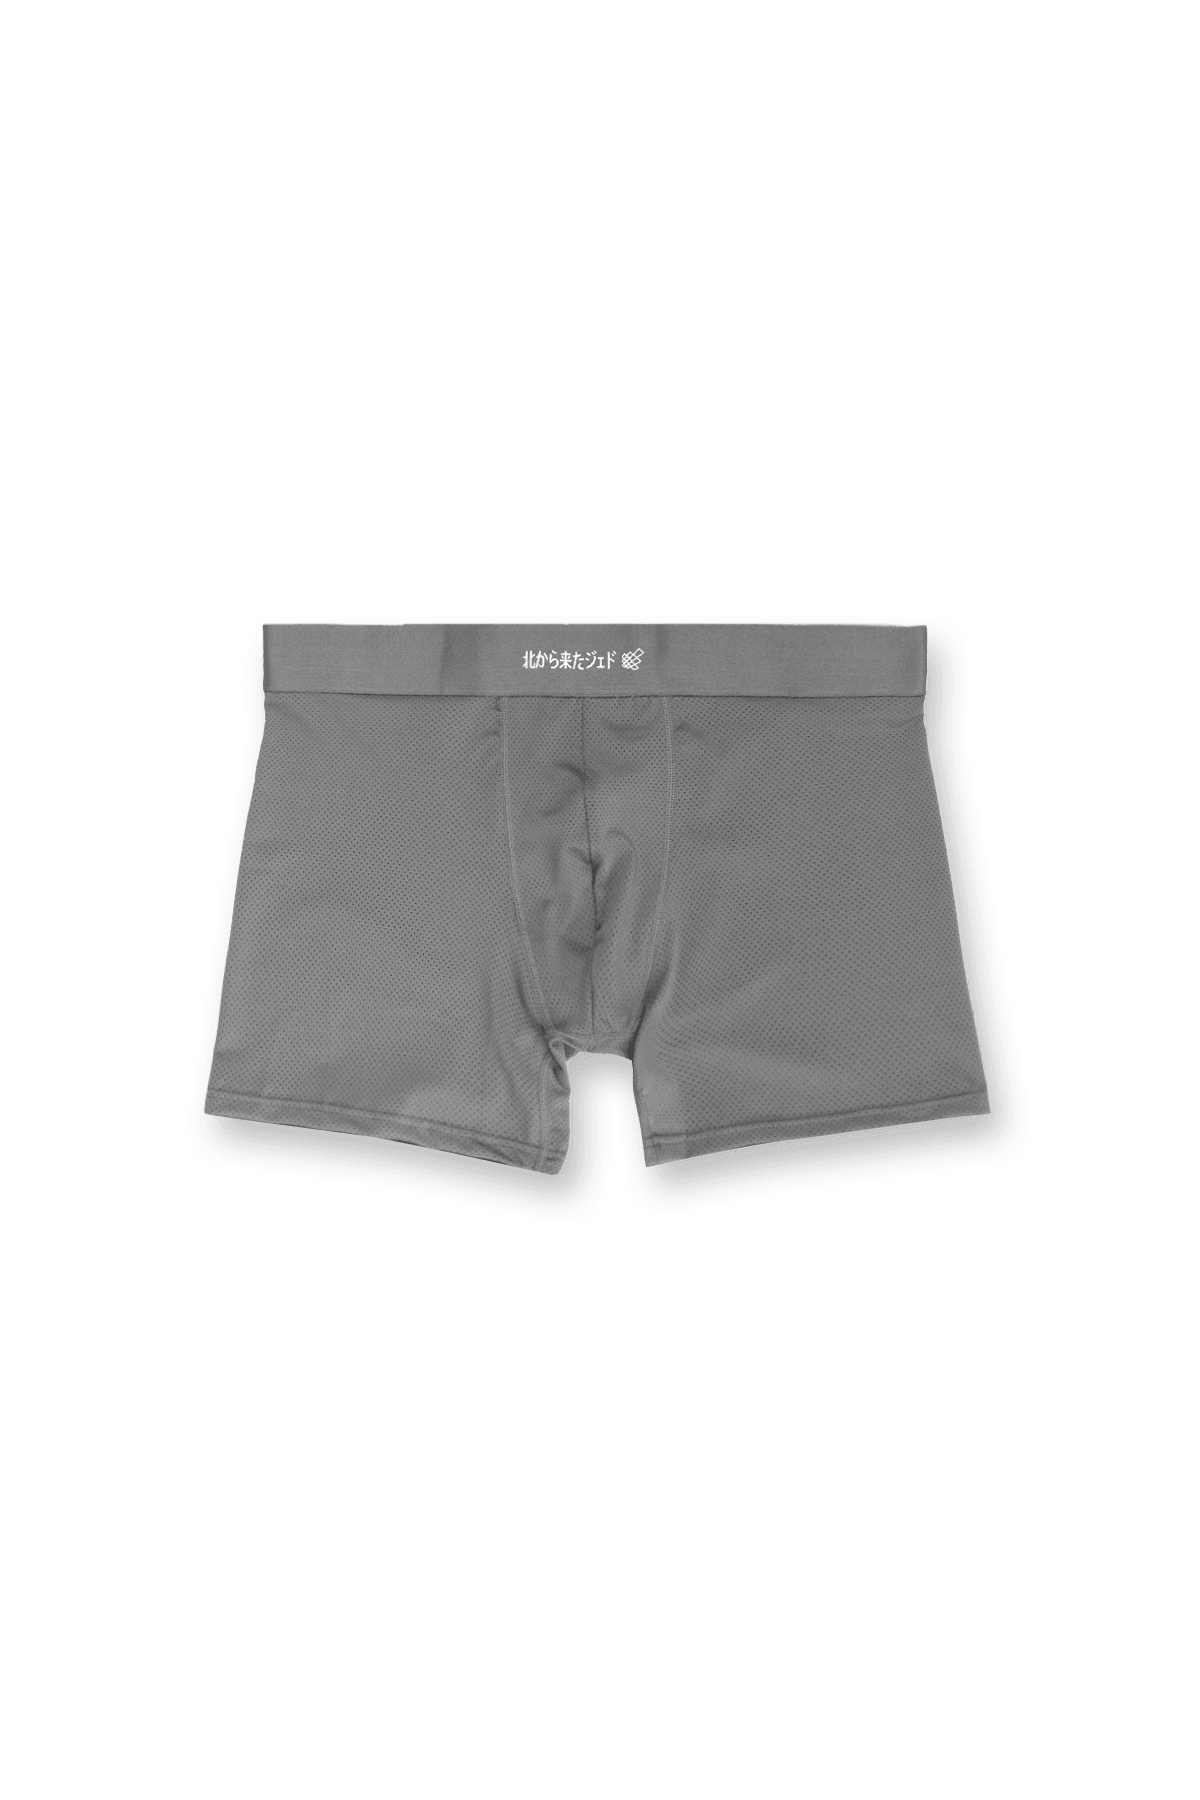 Men's Full Mesh Boxer Briefs 2 Pack - Black and Gray - Jed North Canada